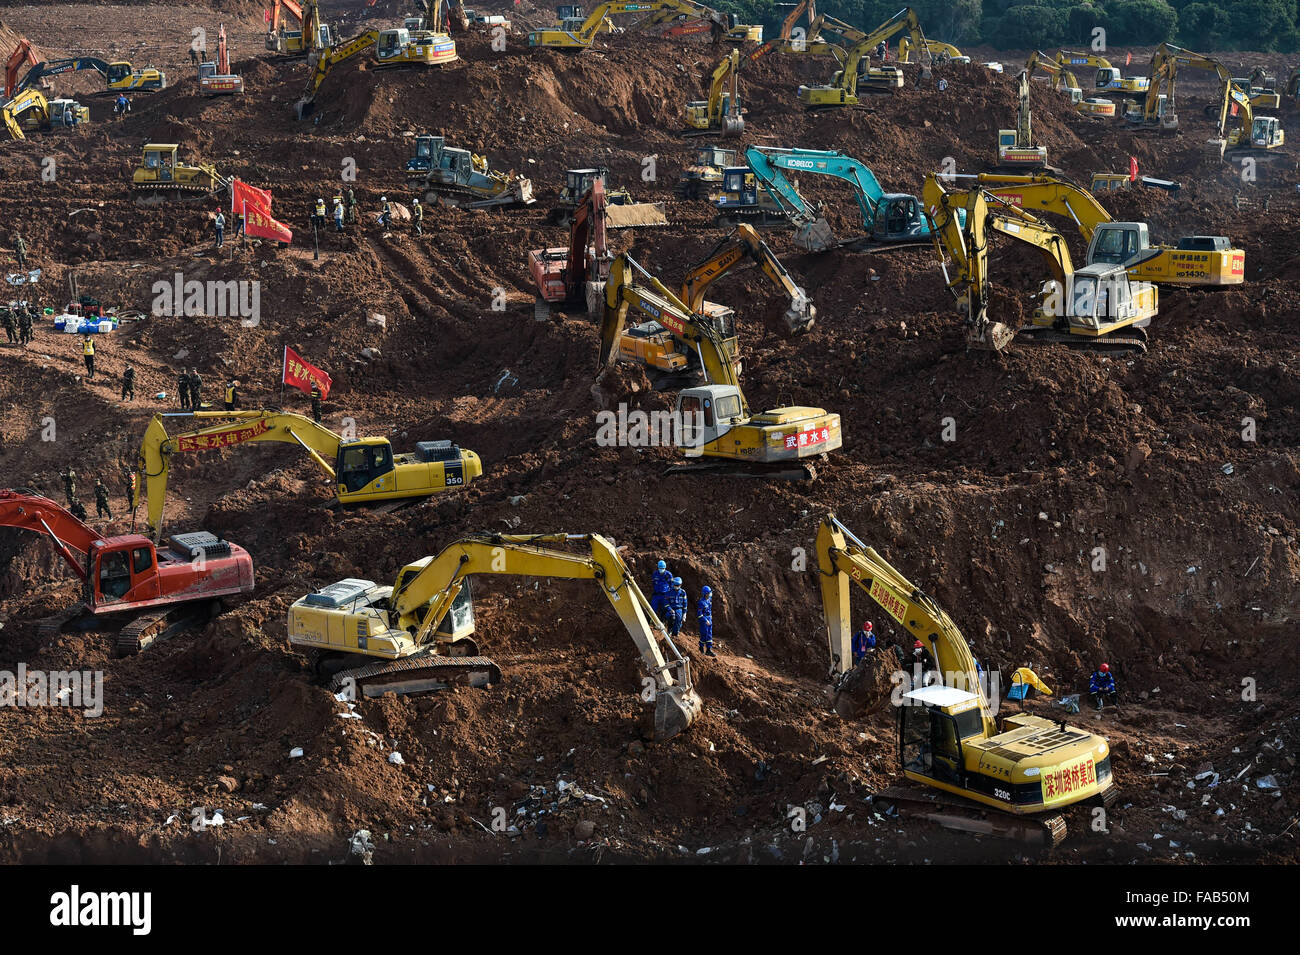 Shenzhen, China's Guangdong Province. 25th Dec, 2015. Rescuers work at the landslide site at an industrial park in Shenzhen, south China's Guangdong Province, Dec. 25, 2015. A landslide that has left dozens missing in Shenzhen was a work safety incident, not a geological disaster, a State Council investigation team confirmed Friday. The tragedy was caused by the collapse of a huge pile of construction waste, rather than any natural geological phenomenon, the investigation team said in a statement. Credit:  Mao Siqian/Xinhua/Alamy Live News Stock Photo